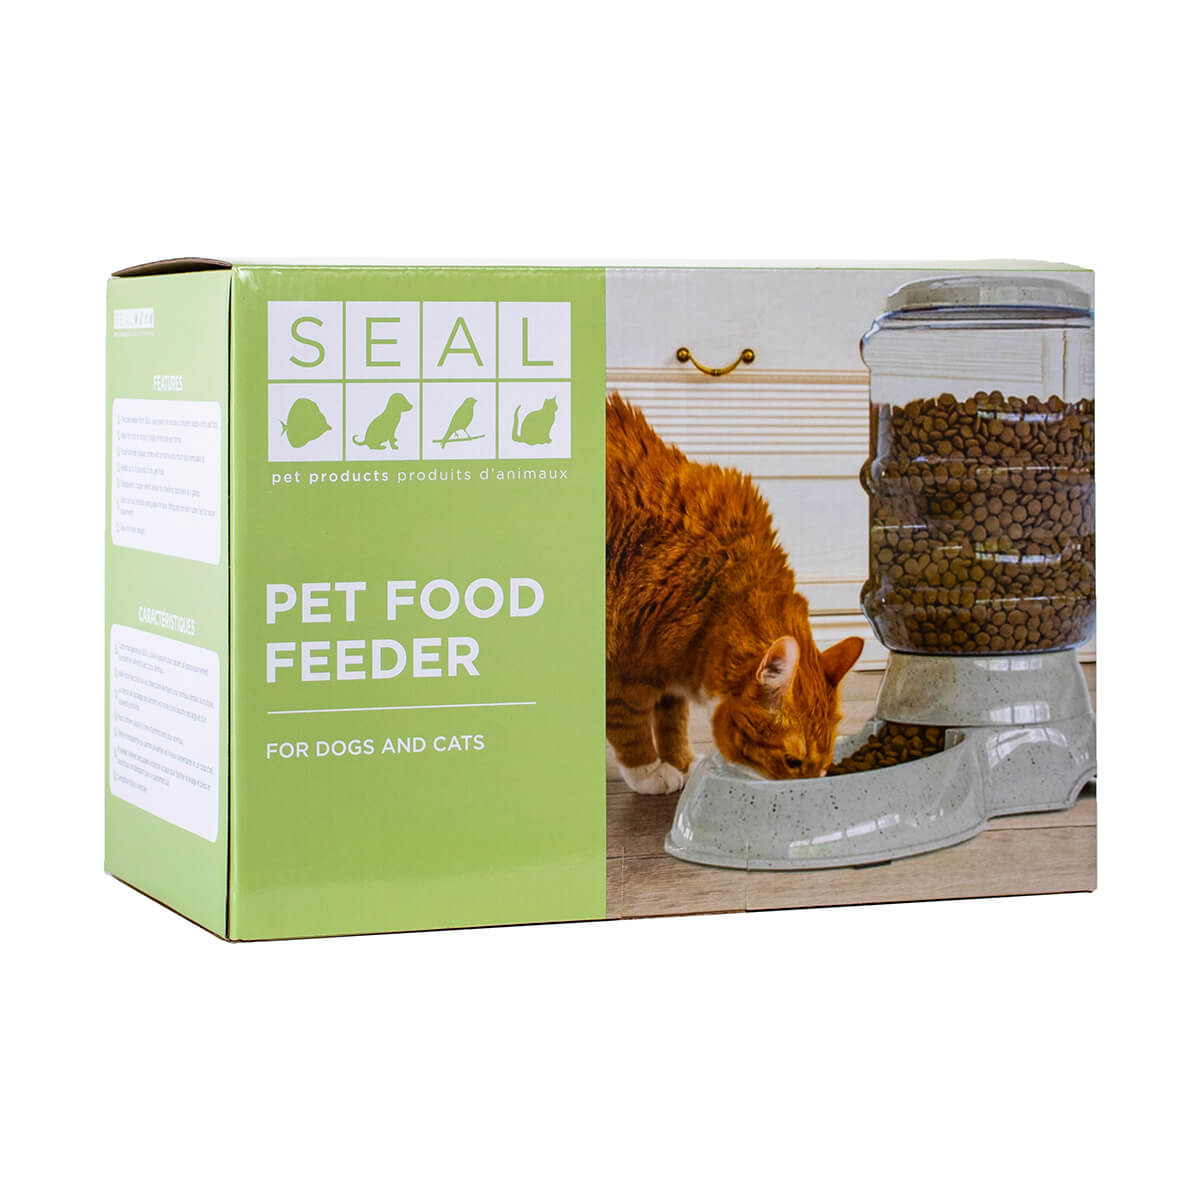 Pet Food Feeder for Dogs and Cats